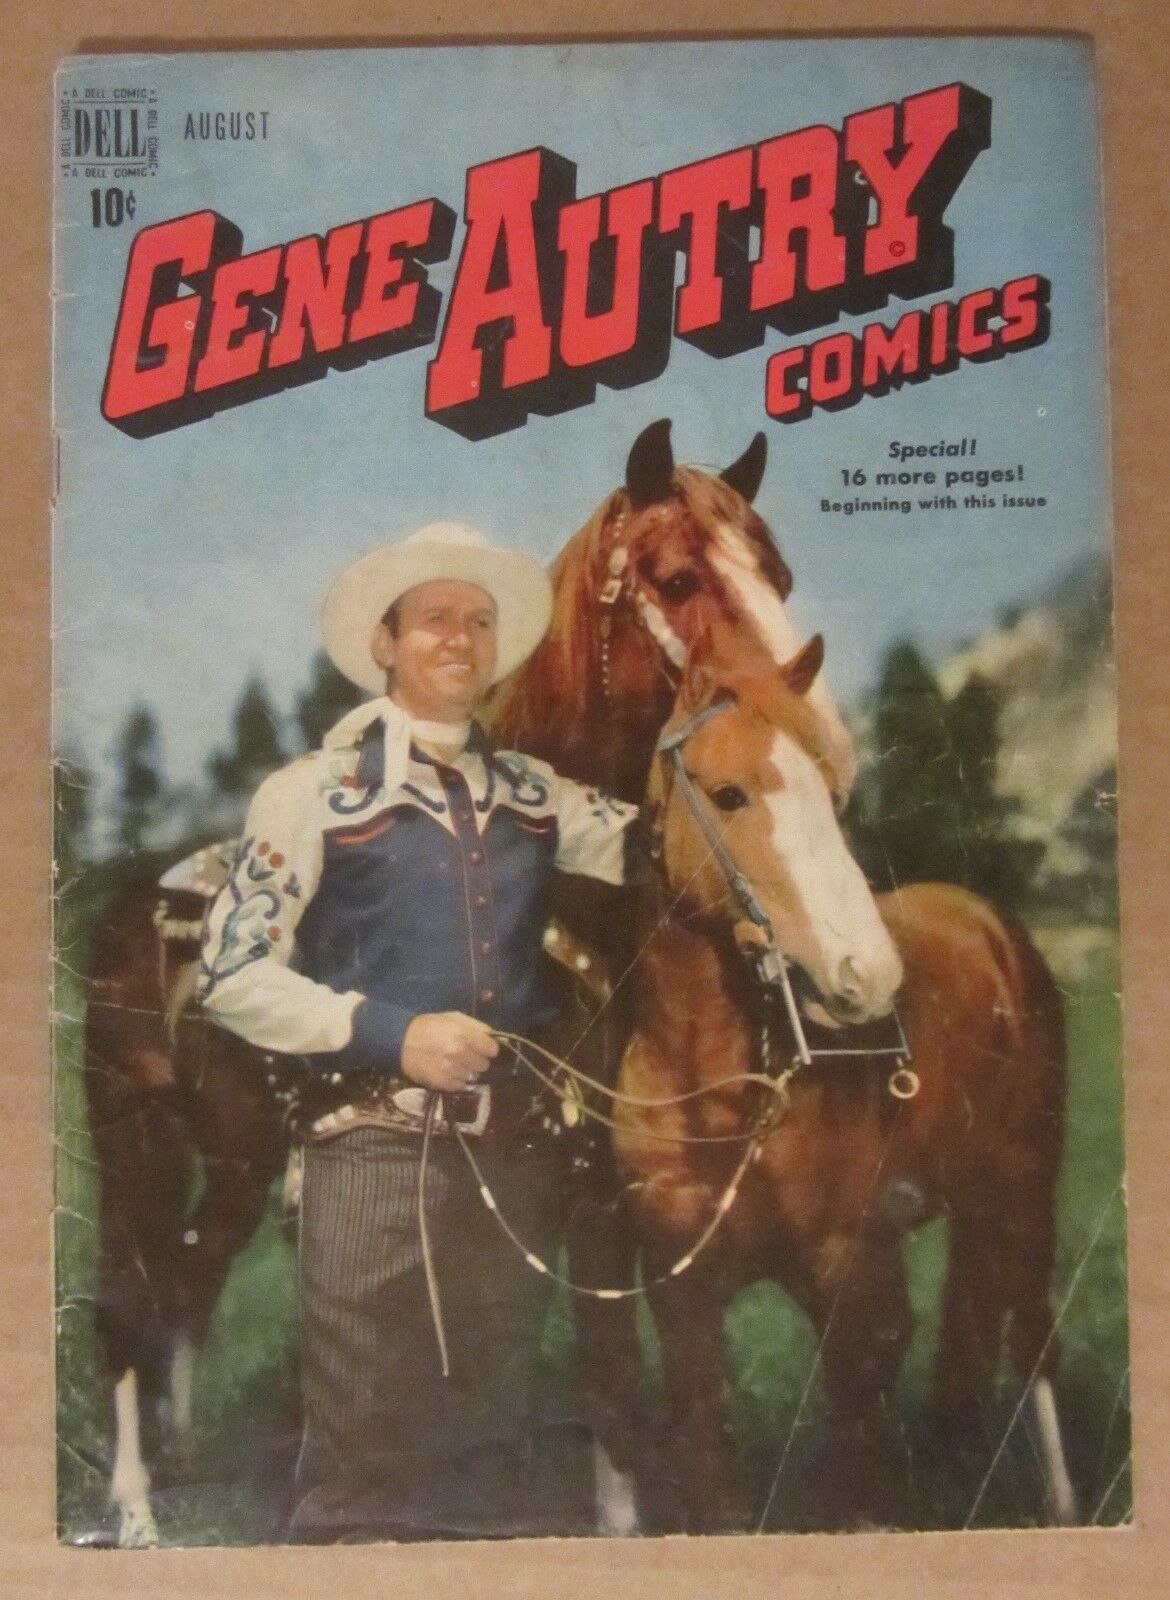 Gene Autry Comics #30 (1949, Dell) 3.5...Photo cover front and back